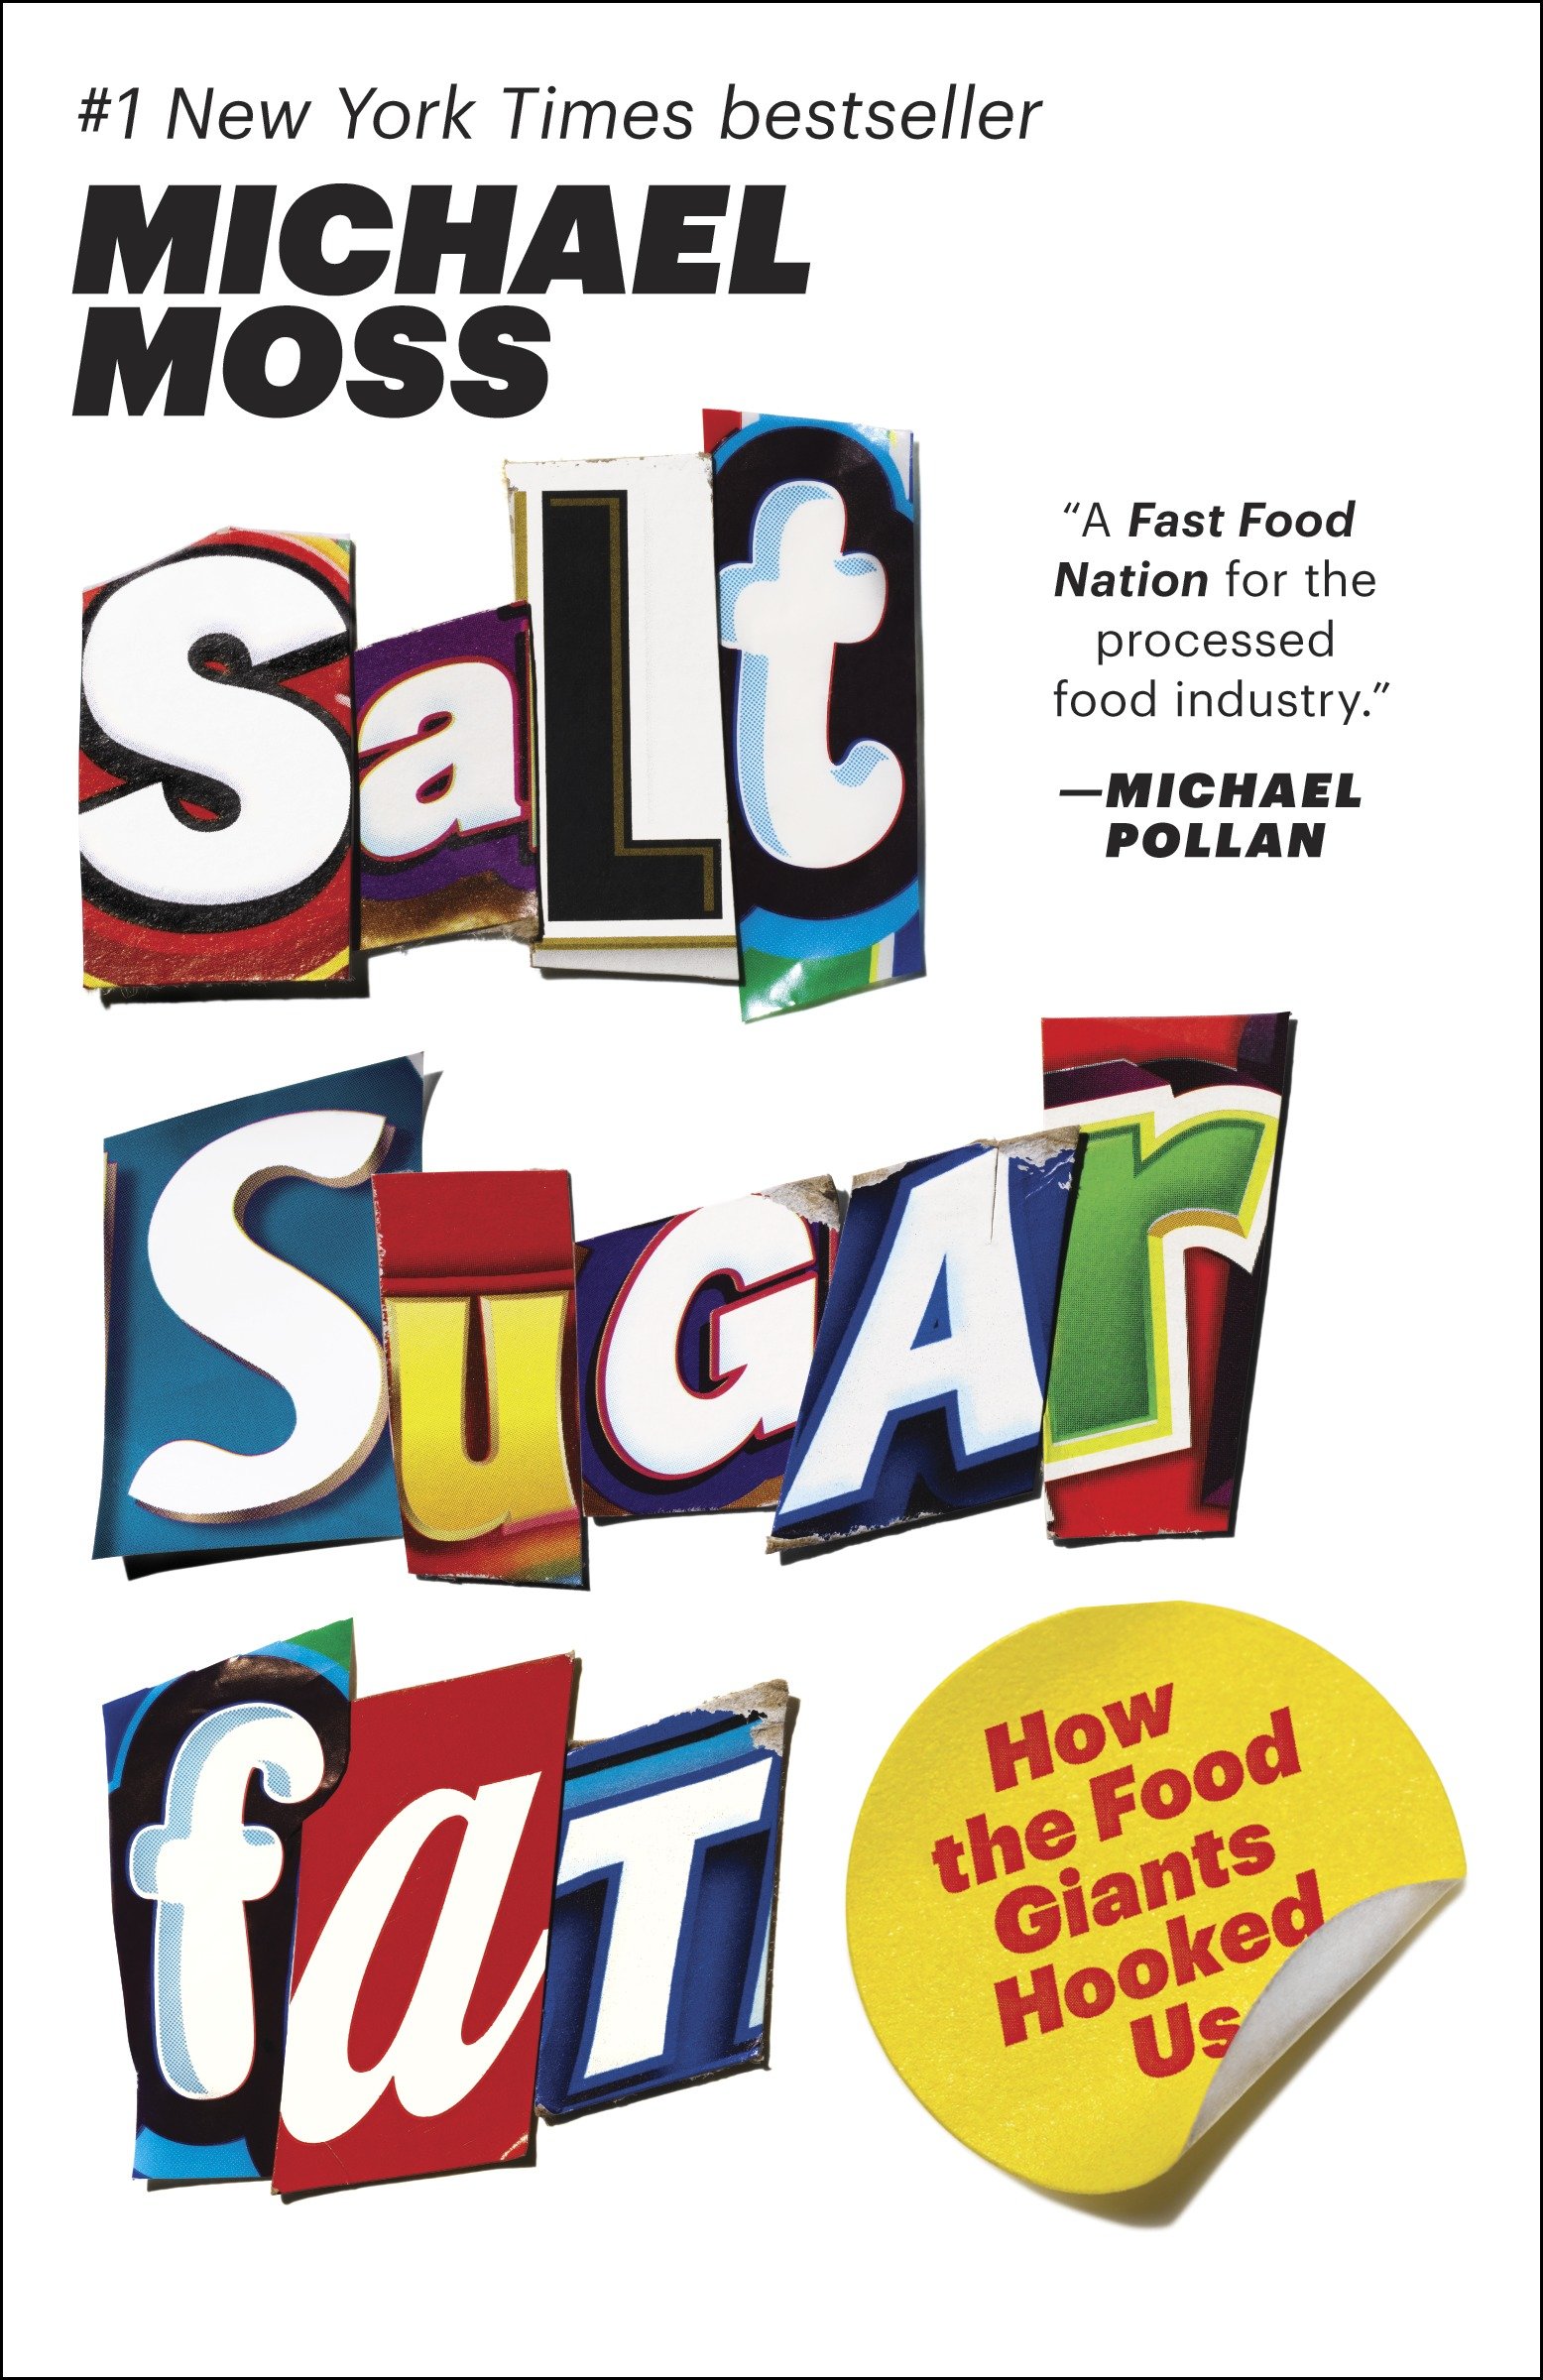 Salt sugar fat how the food giants hooked us cover image